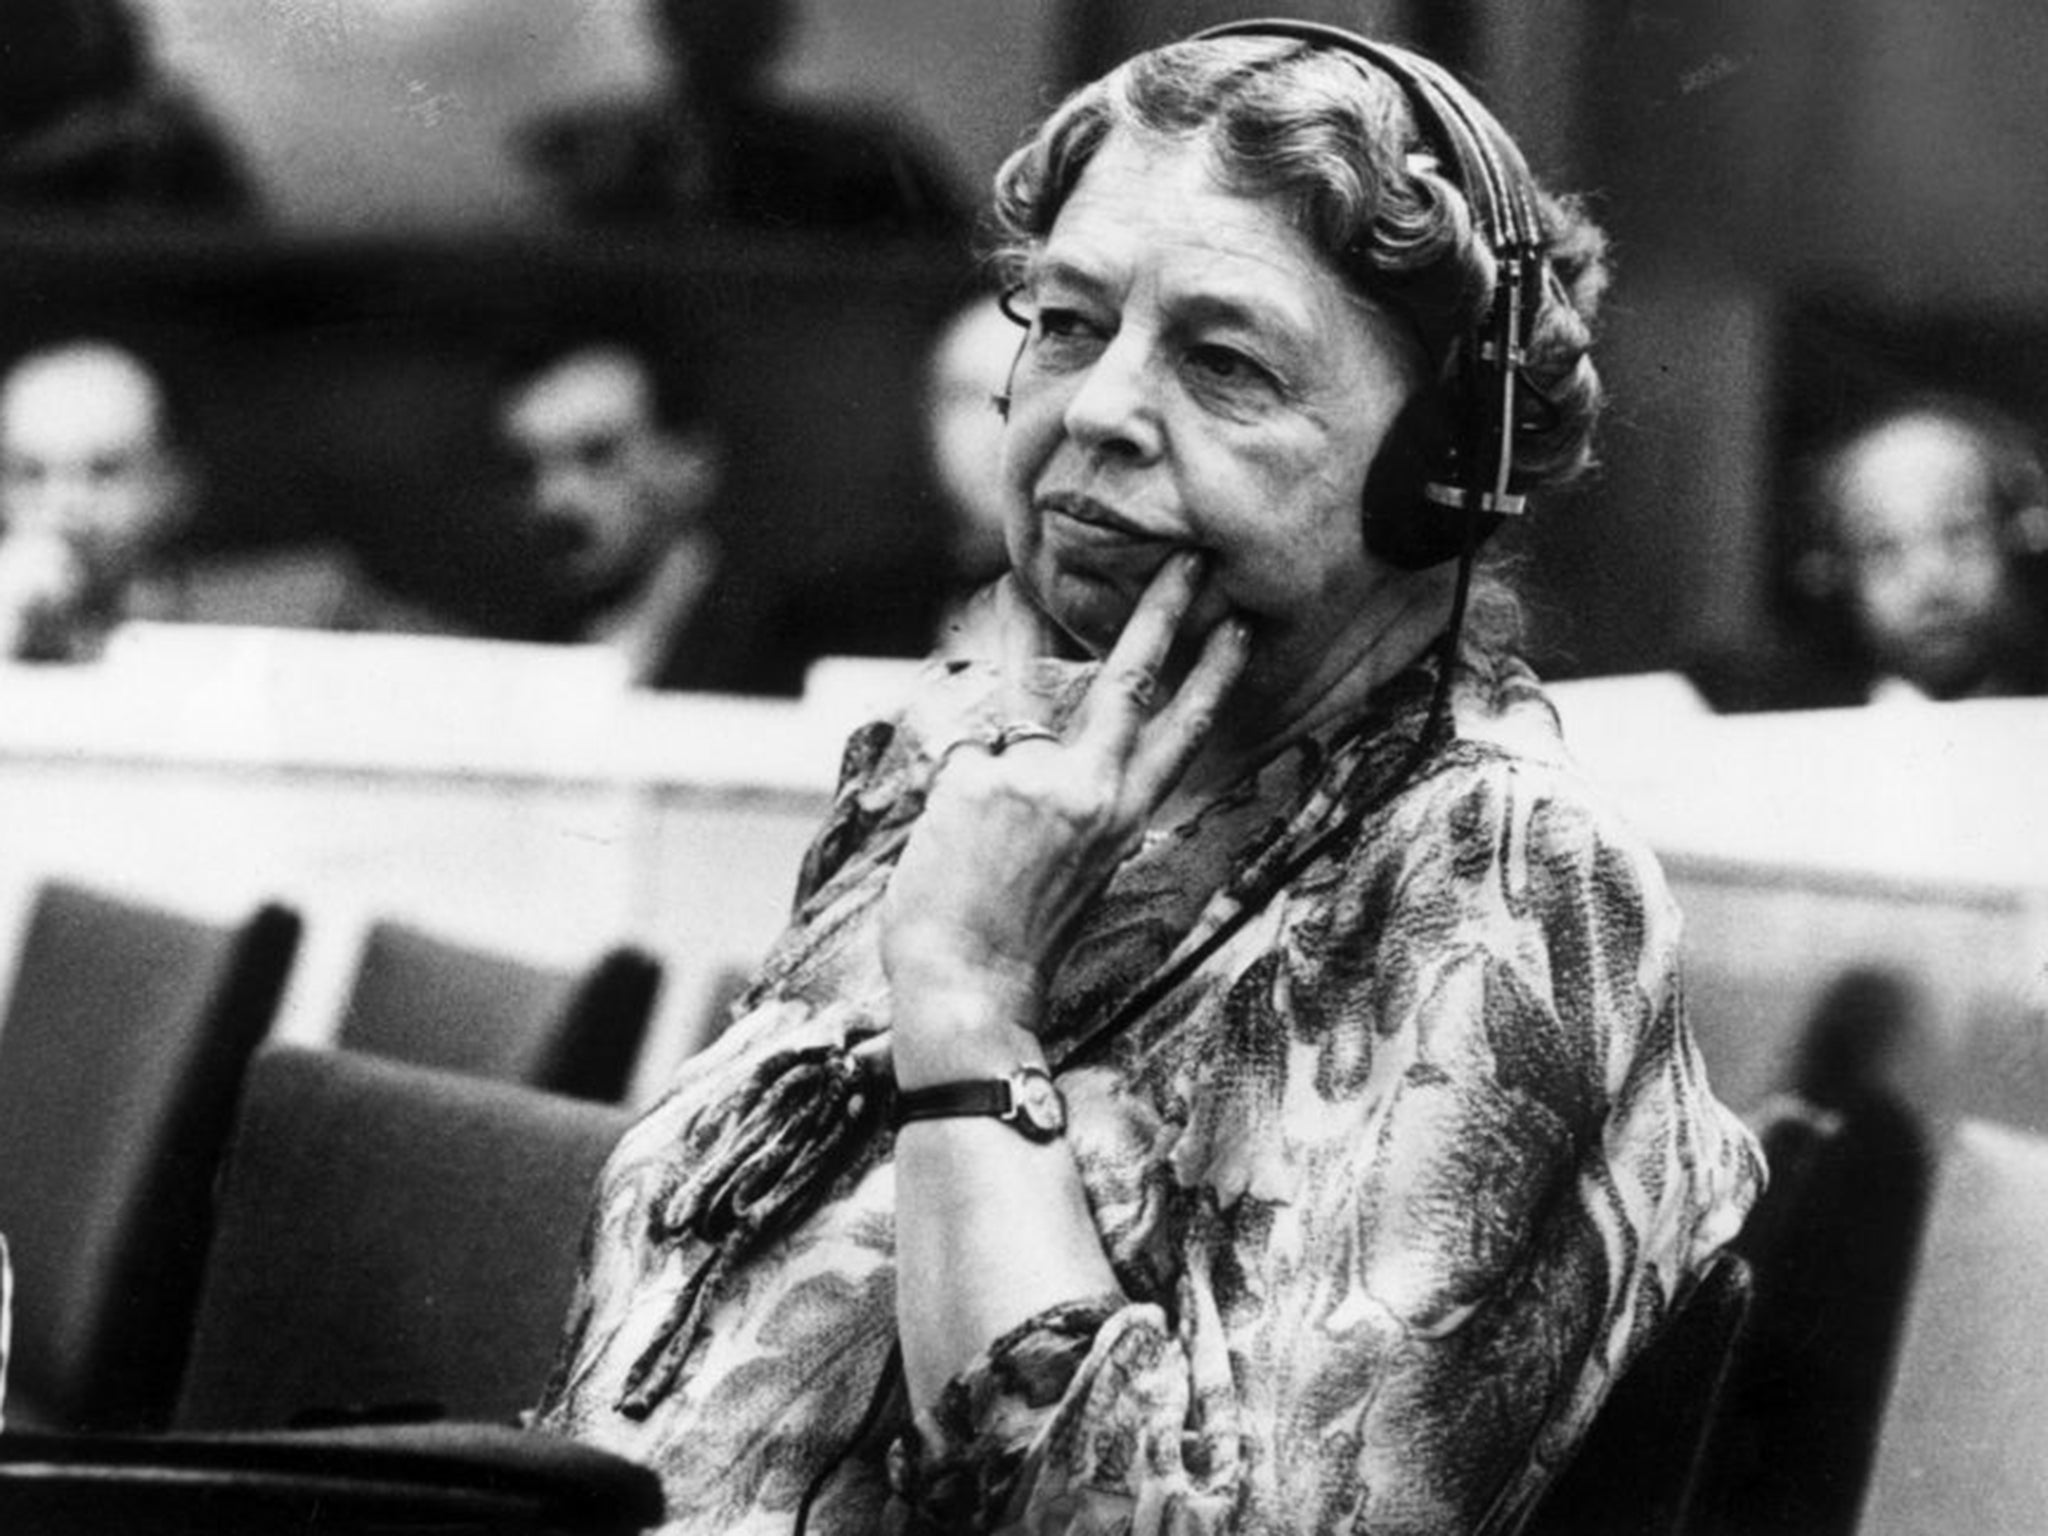 Eleanor Roosevelt said, "No one can make you inferior without your consent"